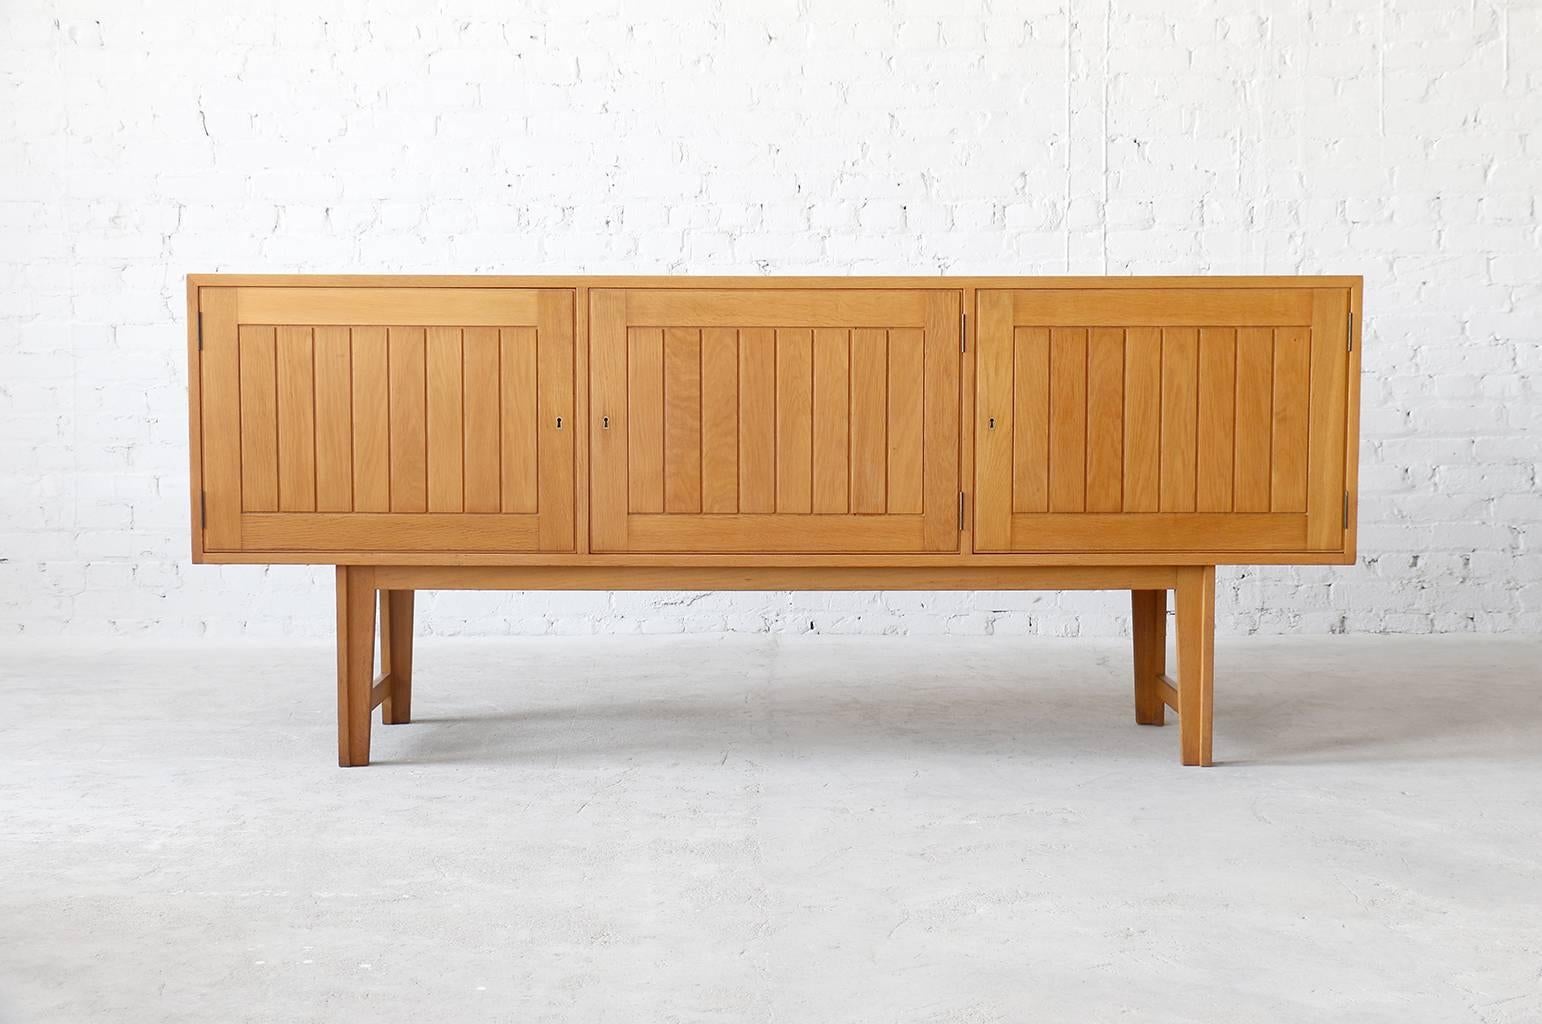 A fine white oak sideboard by Kurt Østervig for Vamo Sonderborg. Excellent construction techniques and the use of large amounts of solid oak including the doors, drawers, frame and legs. Three storage sections including two felt lined drawers. 

-